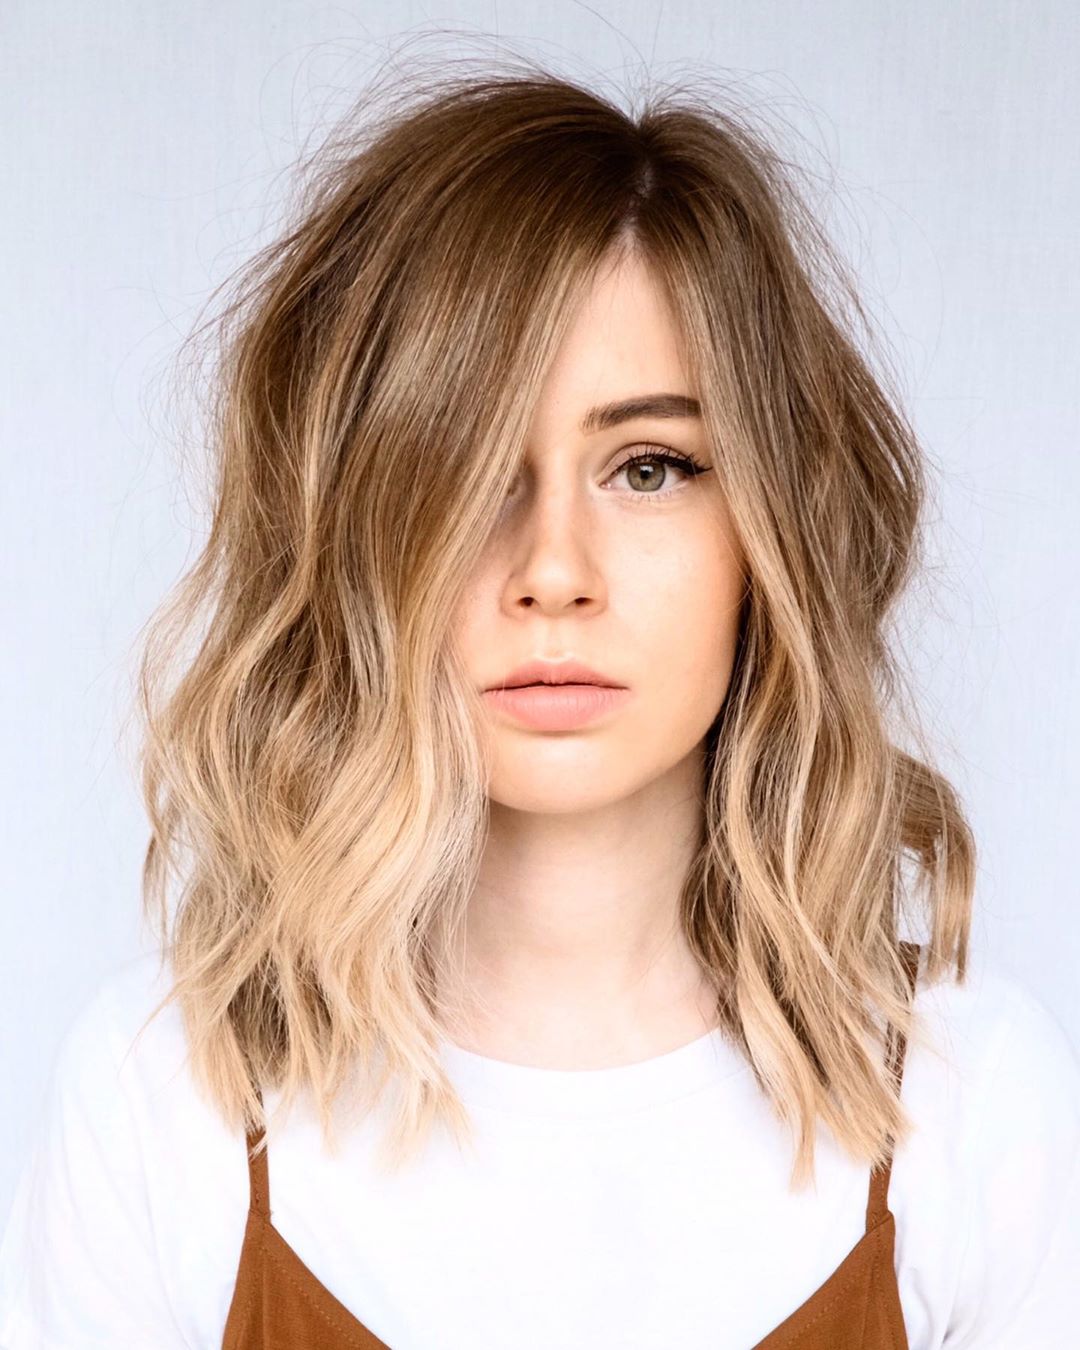 Stylish Shoulder Length Hairstyles for Thick Hair - Women Medium Haircuts and Color in 2021